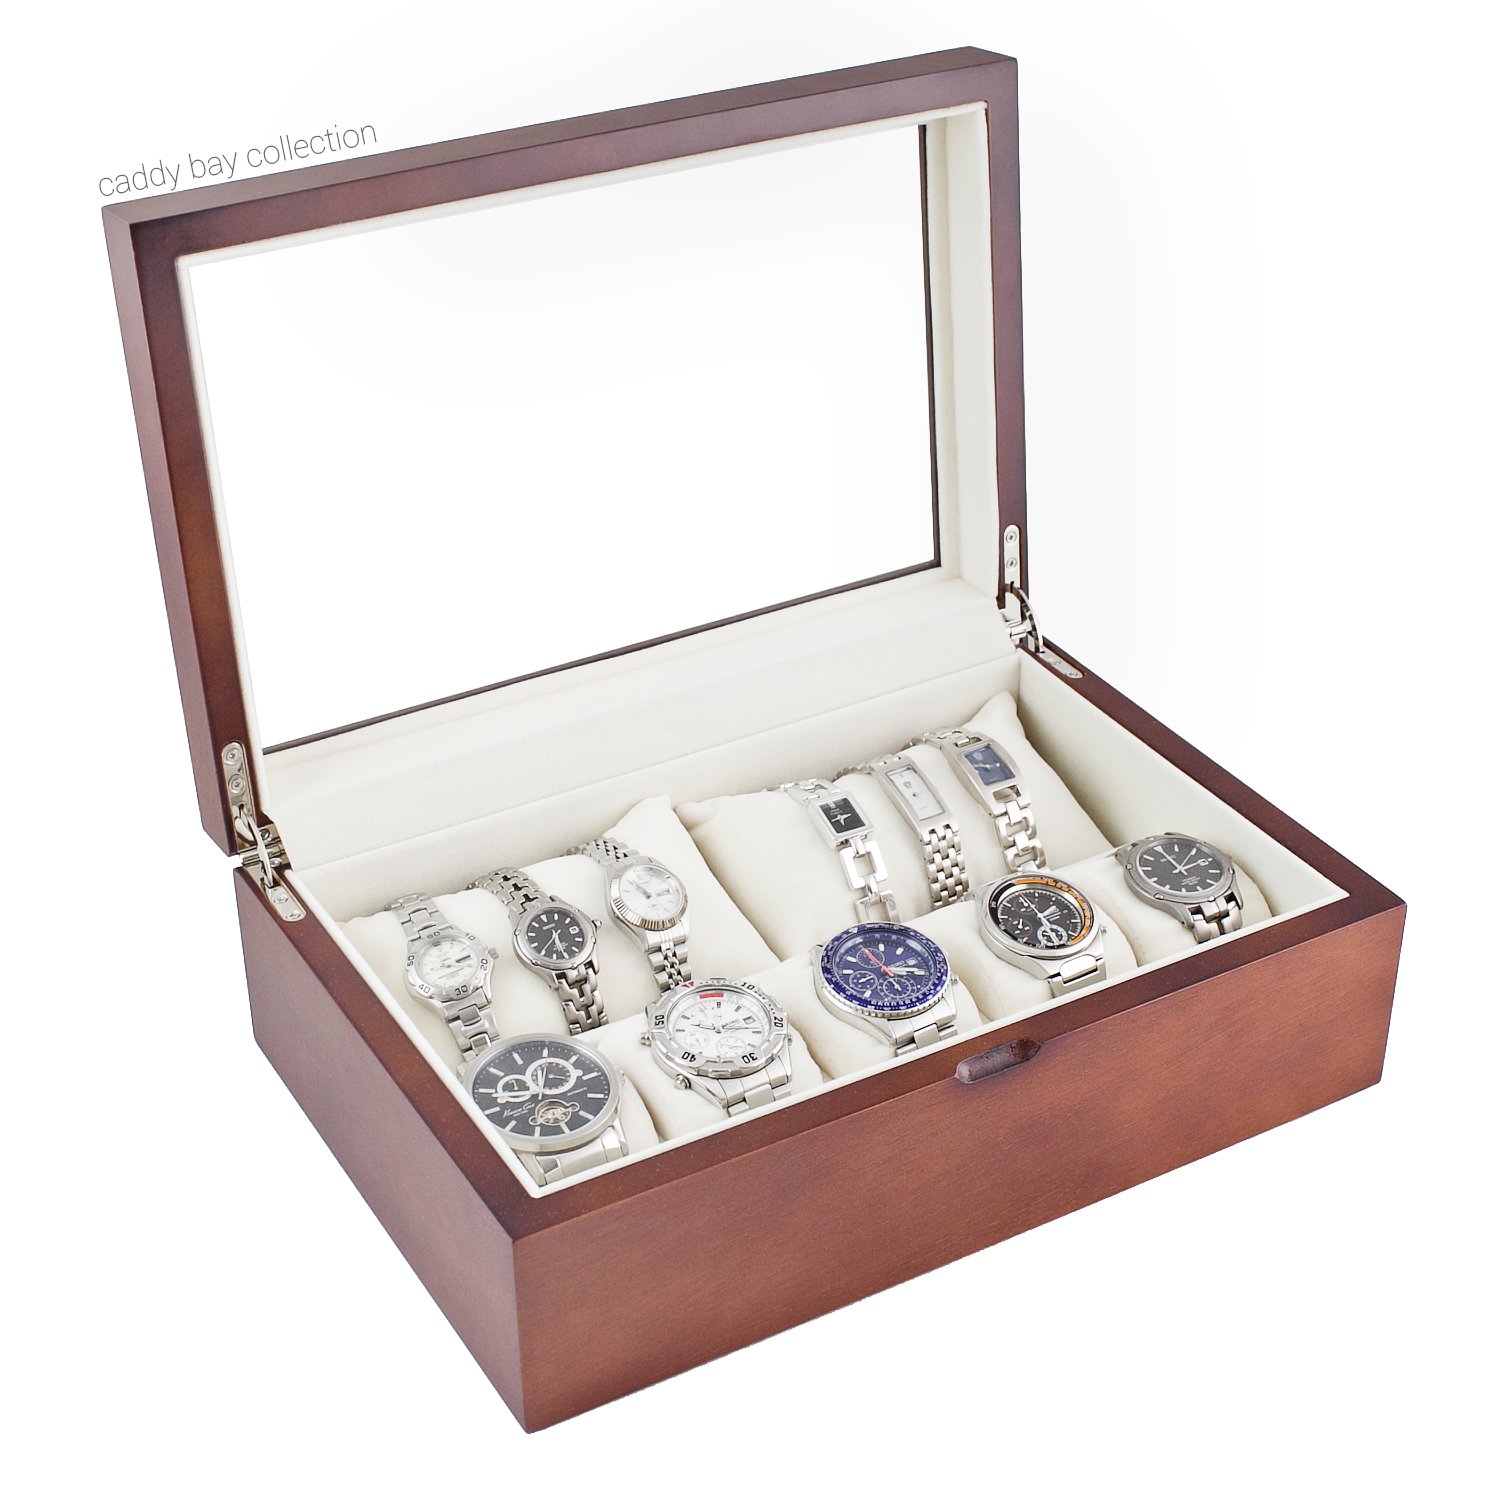 Caddy Bay Collection Vintage Wood Watch Case Holds 10+ Watches with Glass Top Lid and High for Large Watches